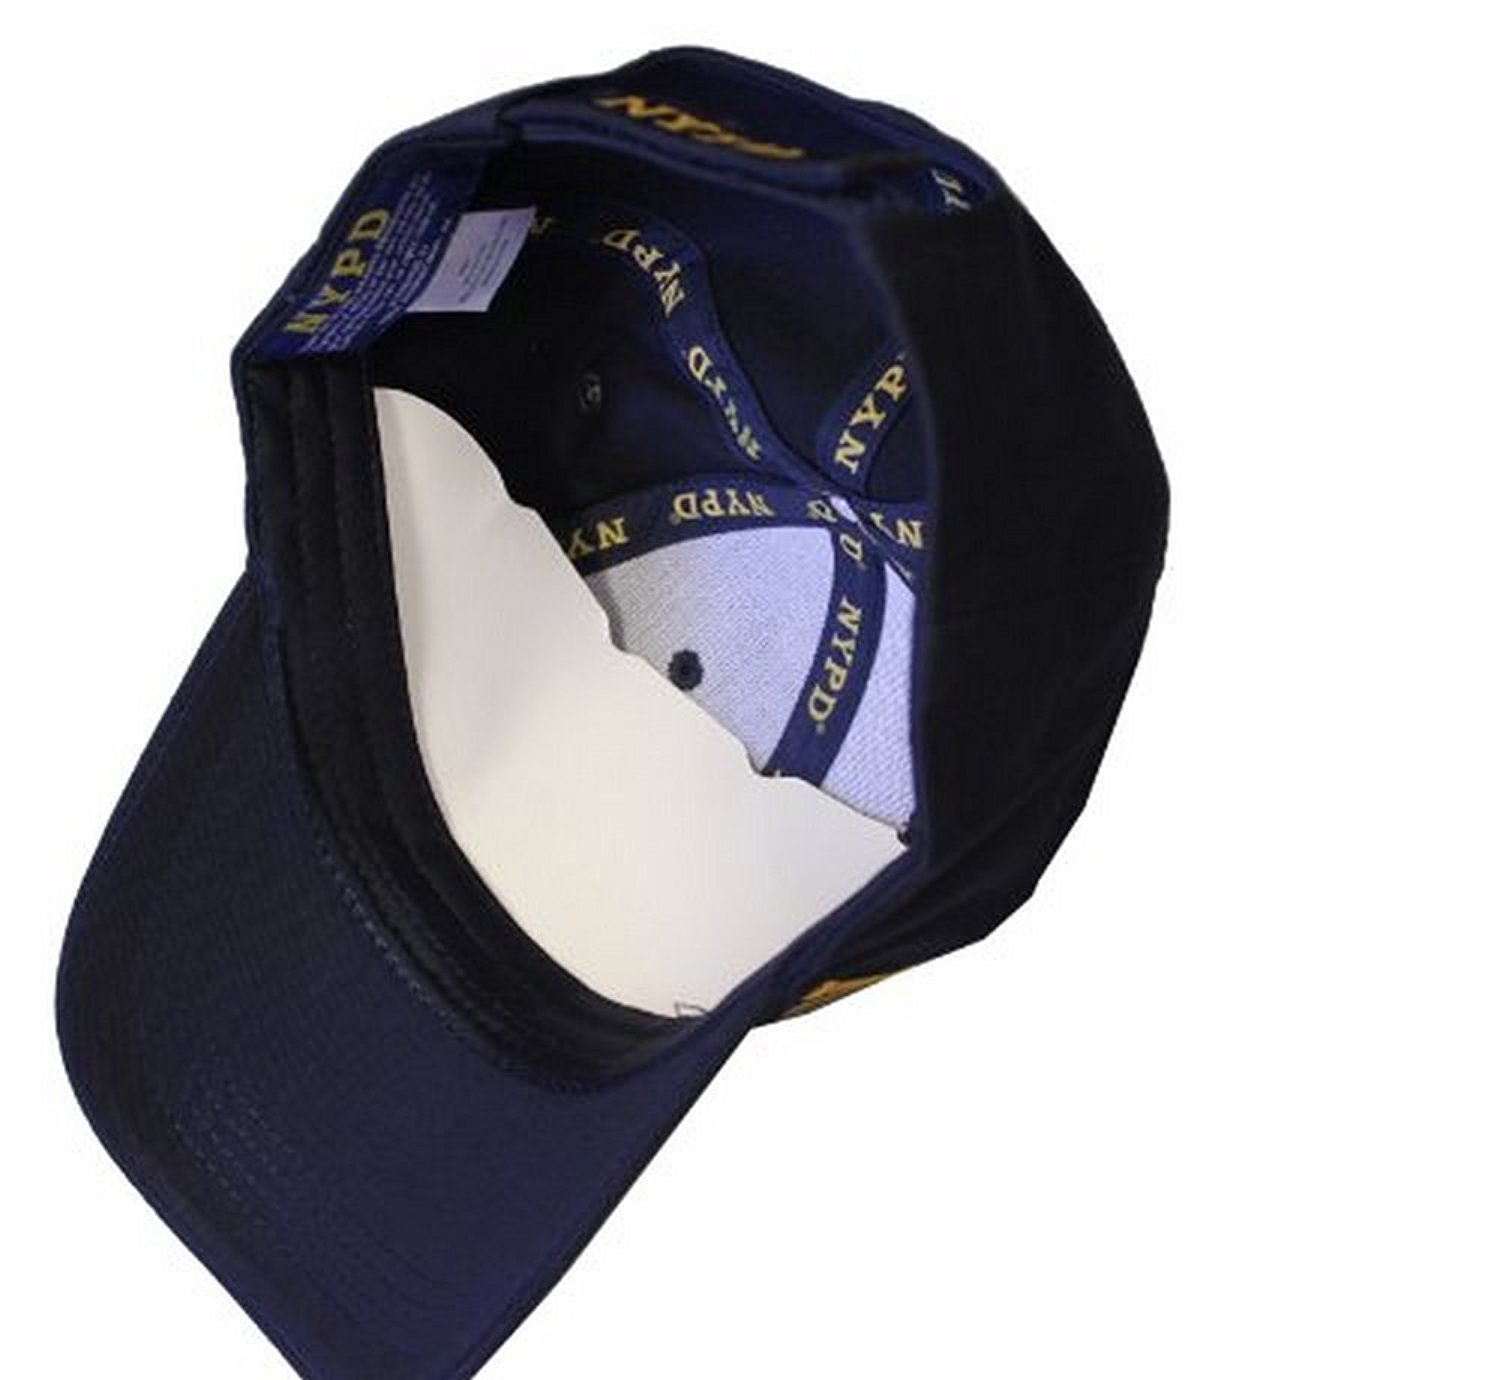 NYPD Baseball Hat New York Police Department Navy & Gold One Size